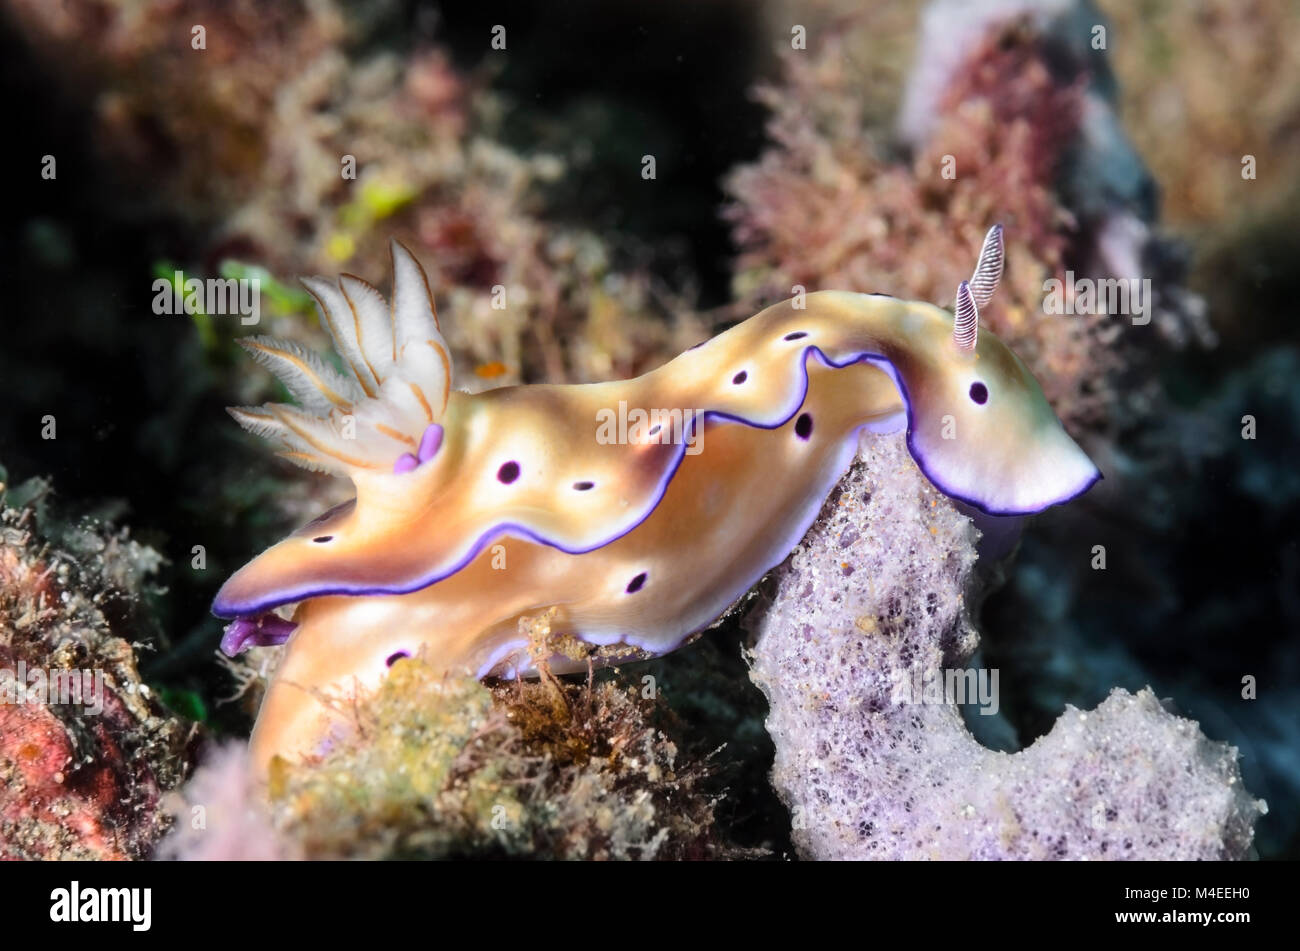 sea slug or nudibranch, Hypselodoris tryoni, with parasitic copepods, Lembeh Strait, North Sulawesi, Indonesia, Pacific Stock Photo